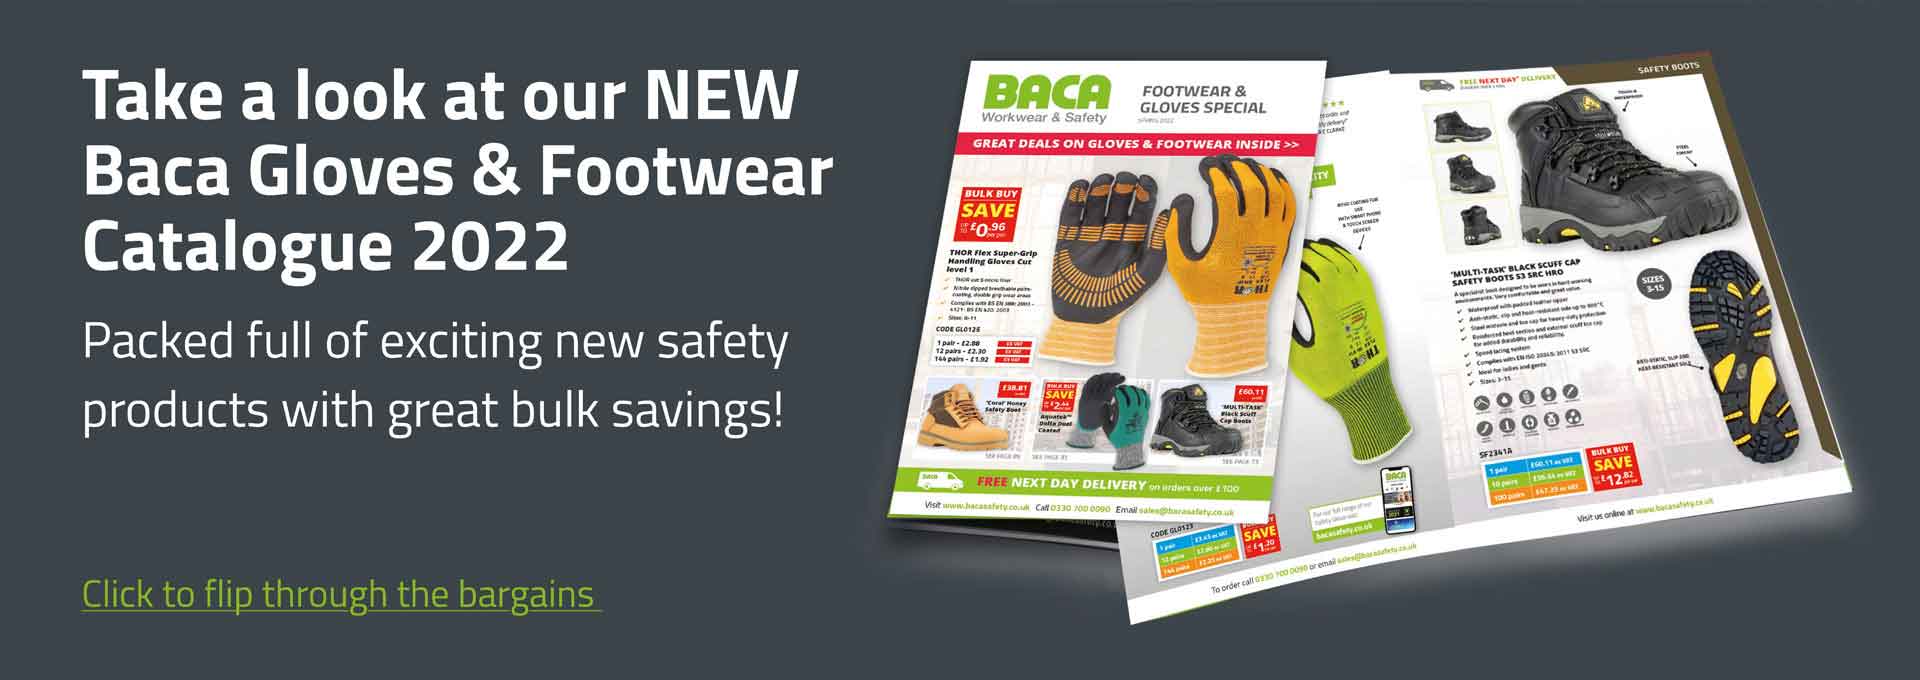 <p><a data-udi="umb://document/ae9cc225274a4faeb7ed6a11eaa200b6" href="/flip-redirect-page/" title="Flip Redirect Page">New Gloves &amp; Footwear Catalogue</a></p>